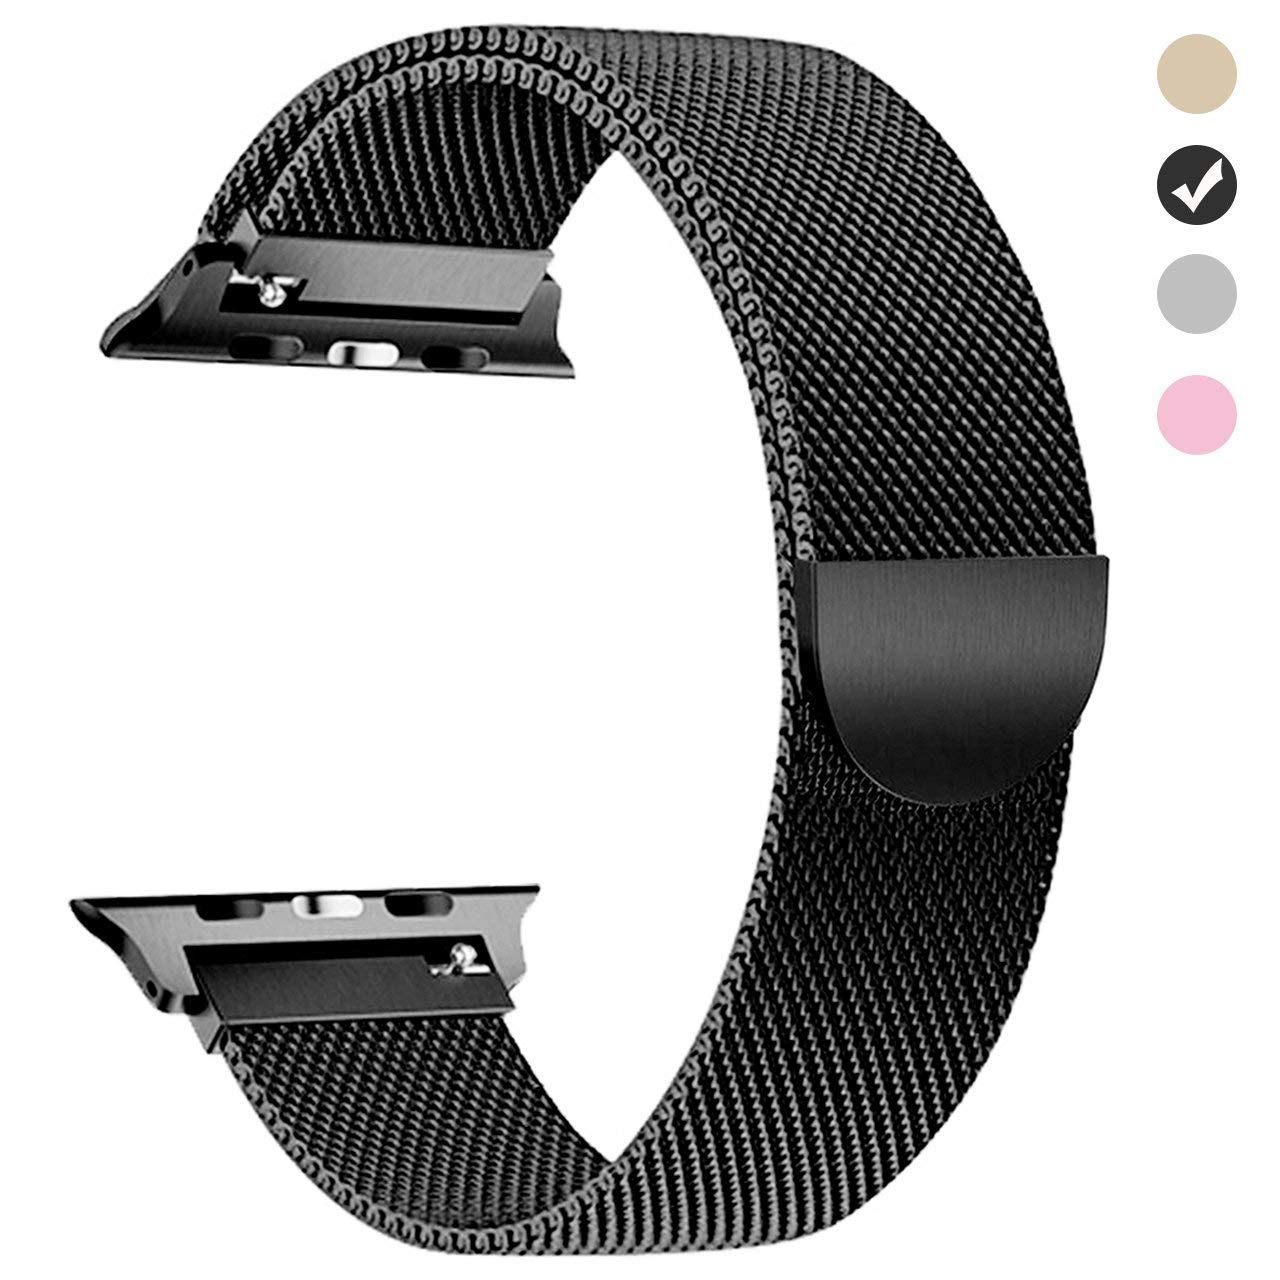 Stainless Steel Magnetic Milanese Loop Strap Wristband Replacement